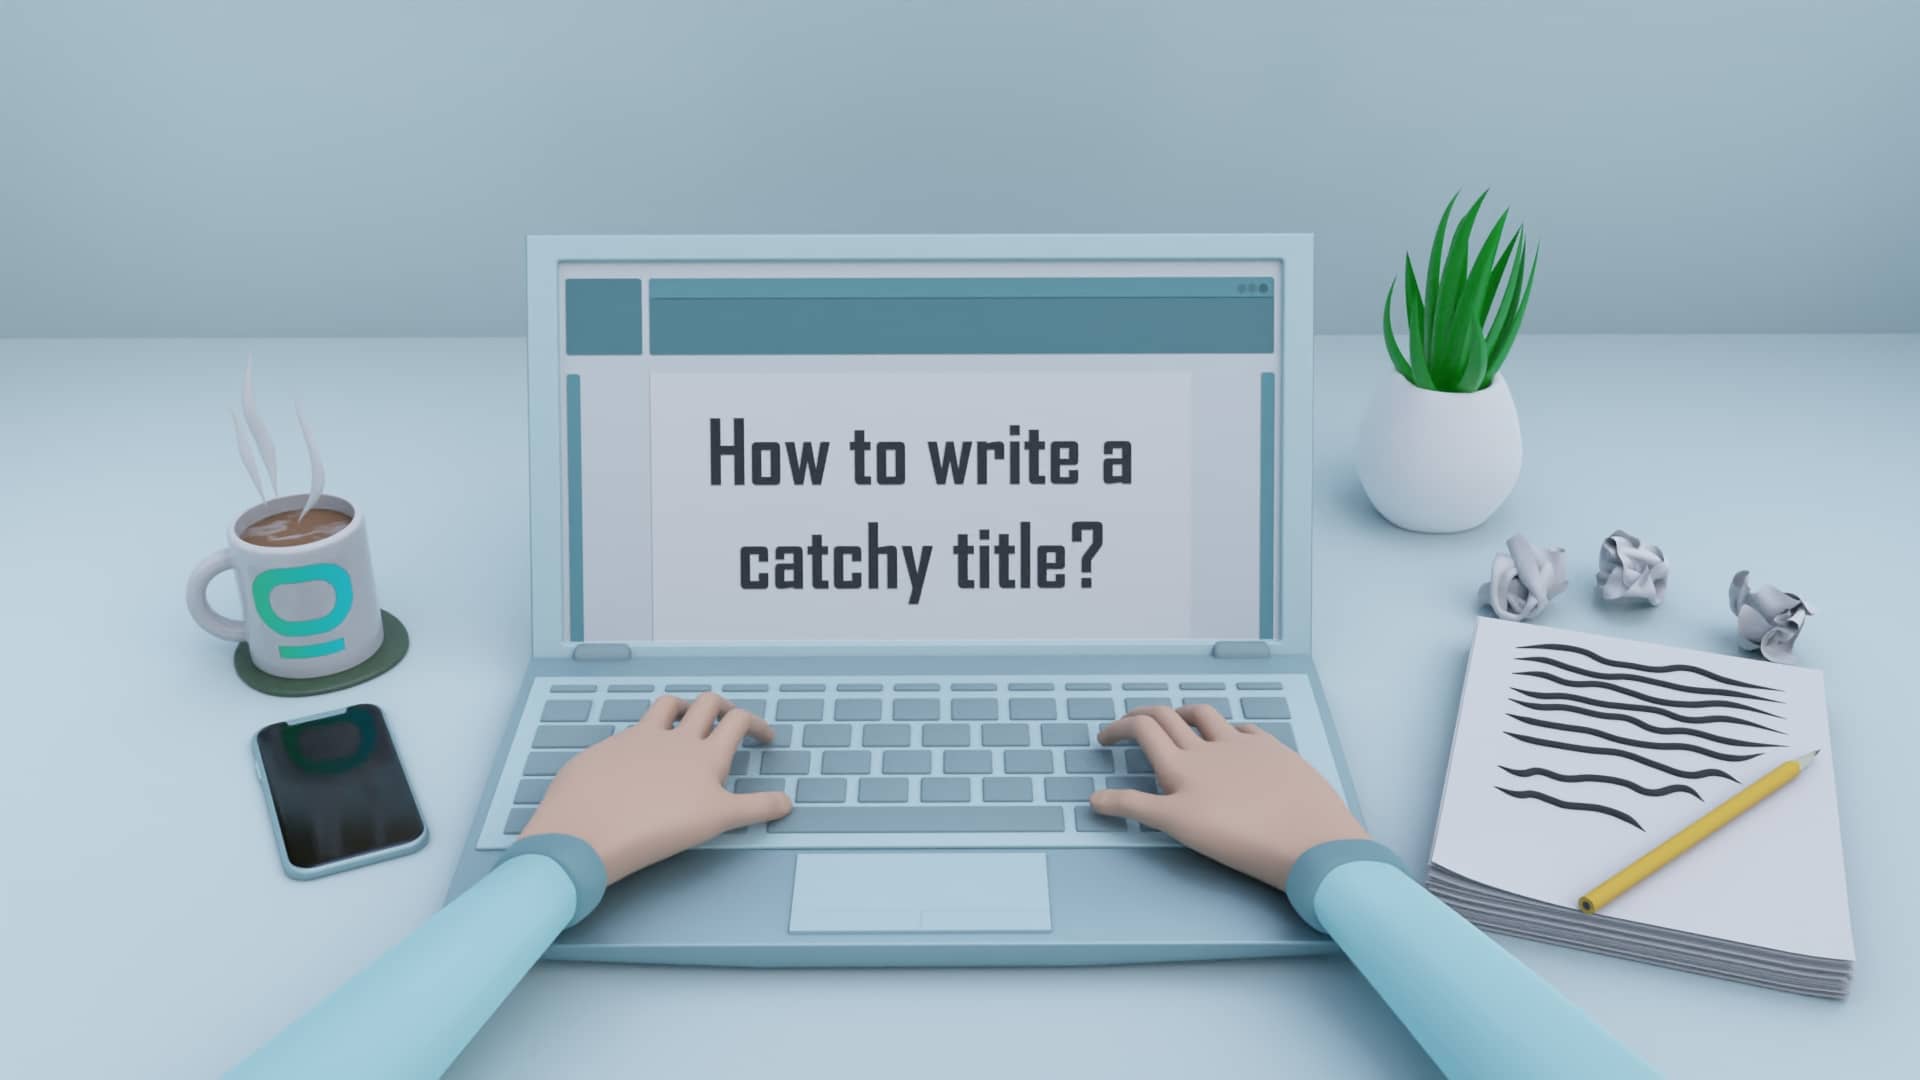 What makes a title catchy?